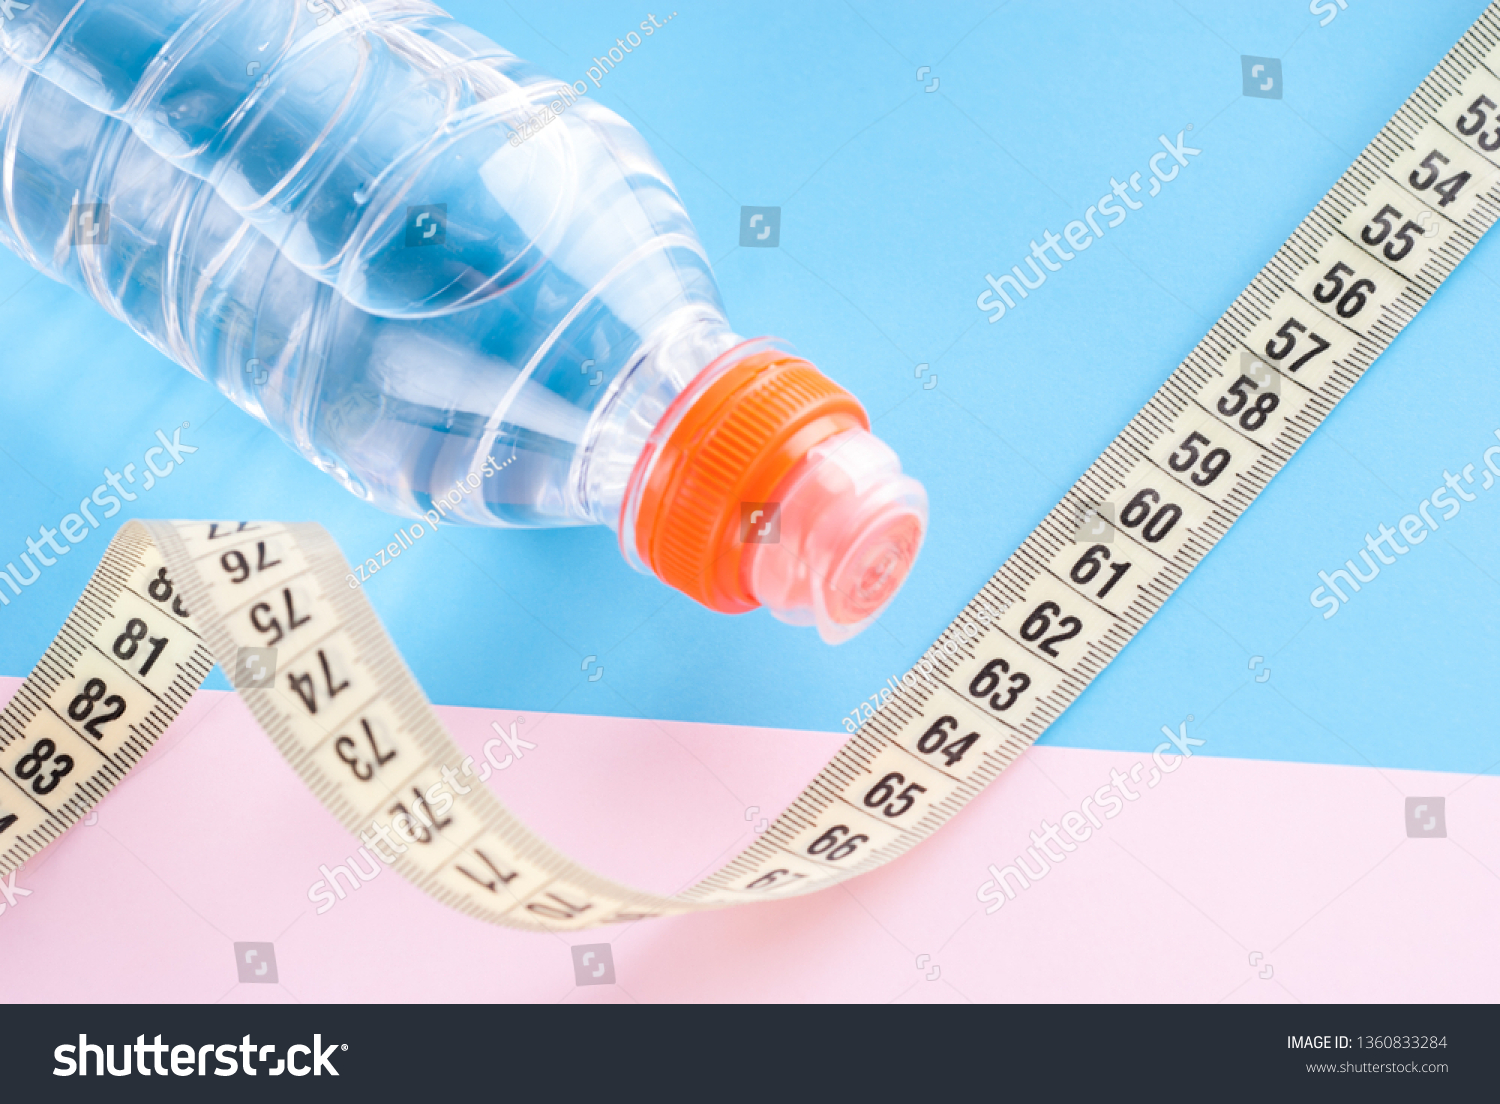 Download Bottle Water Measuring Tape Yellow Measuring Stock Photo Edit Now 1360833284 Yellowimages Mockups